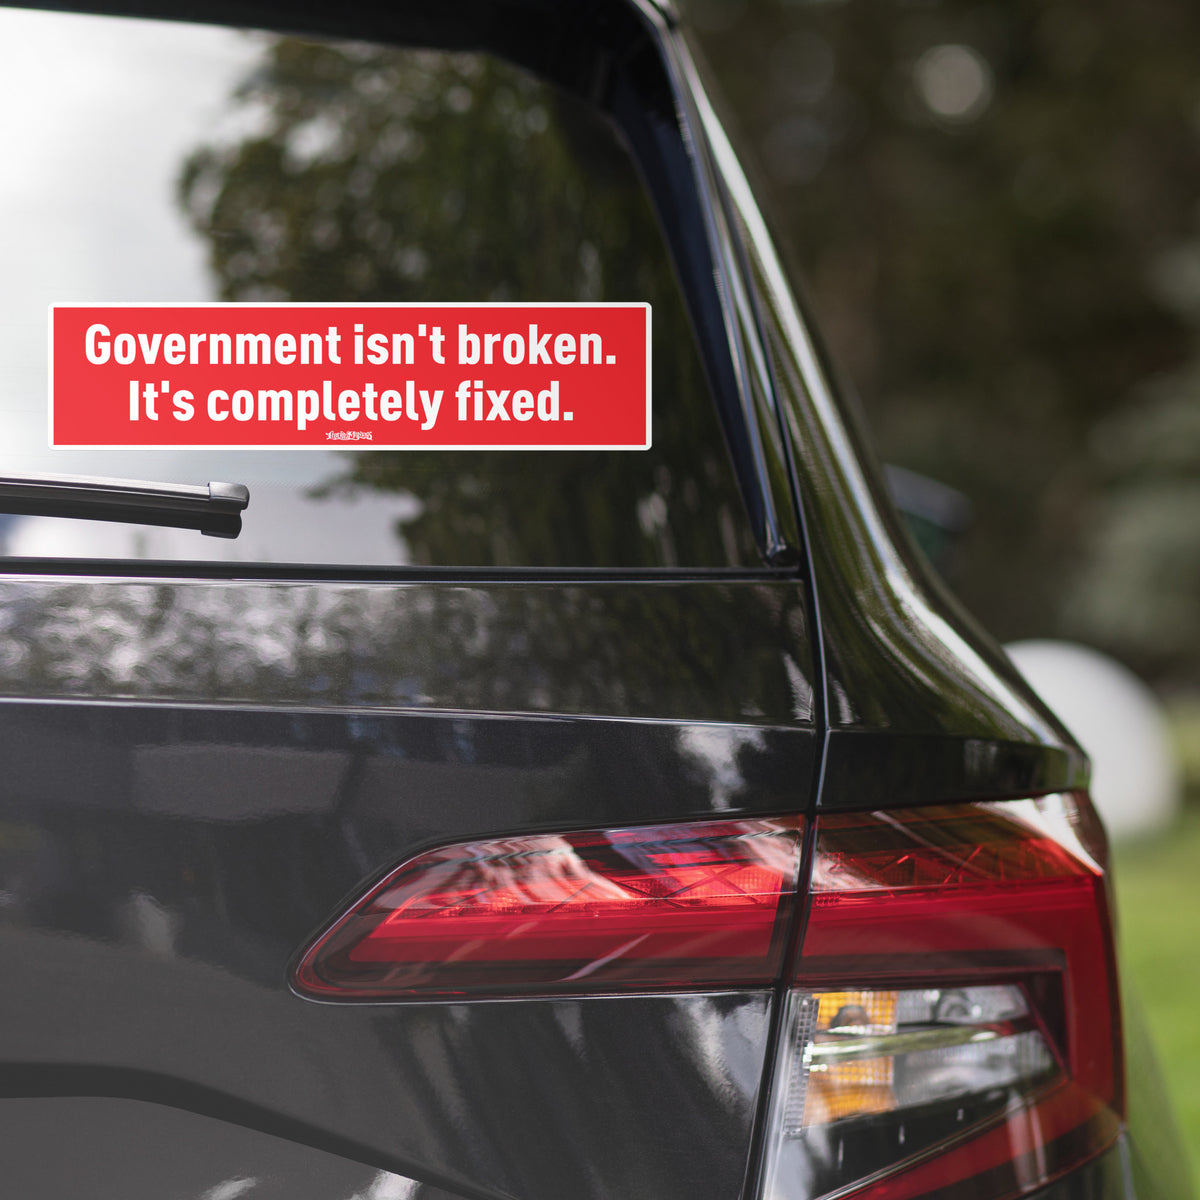 Government is Fixed Jumbo Bumper Sticker